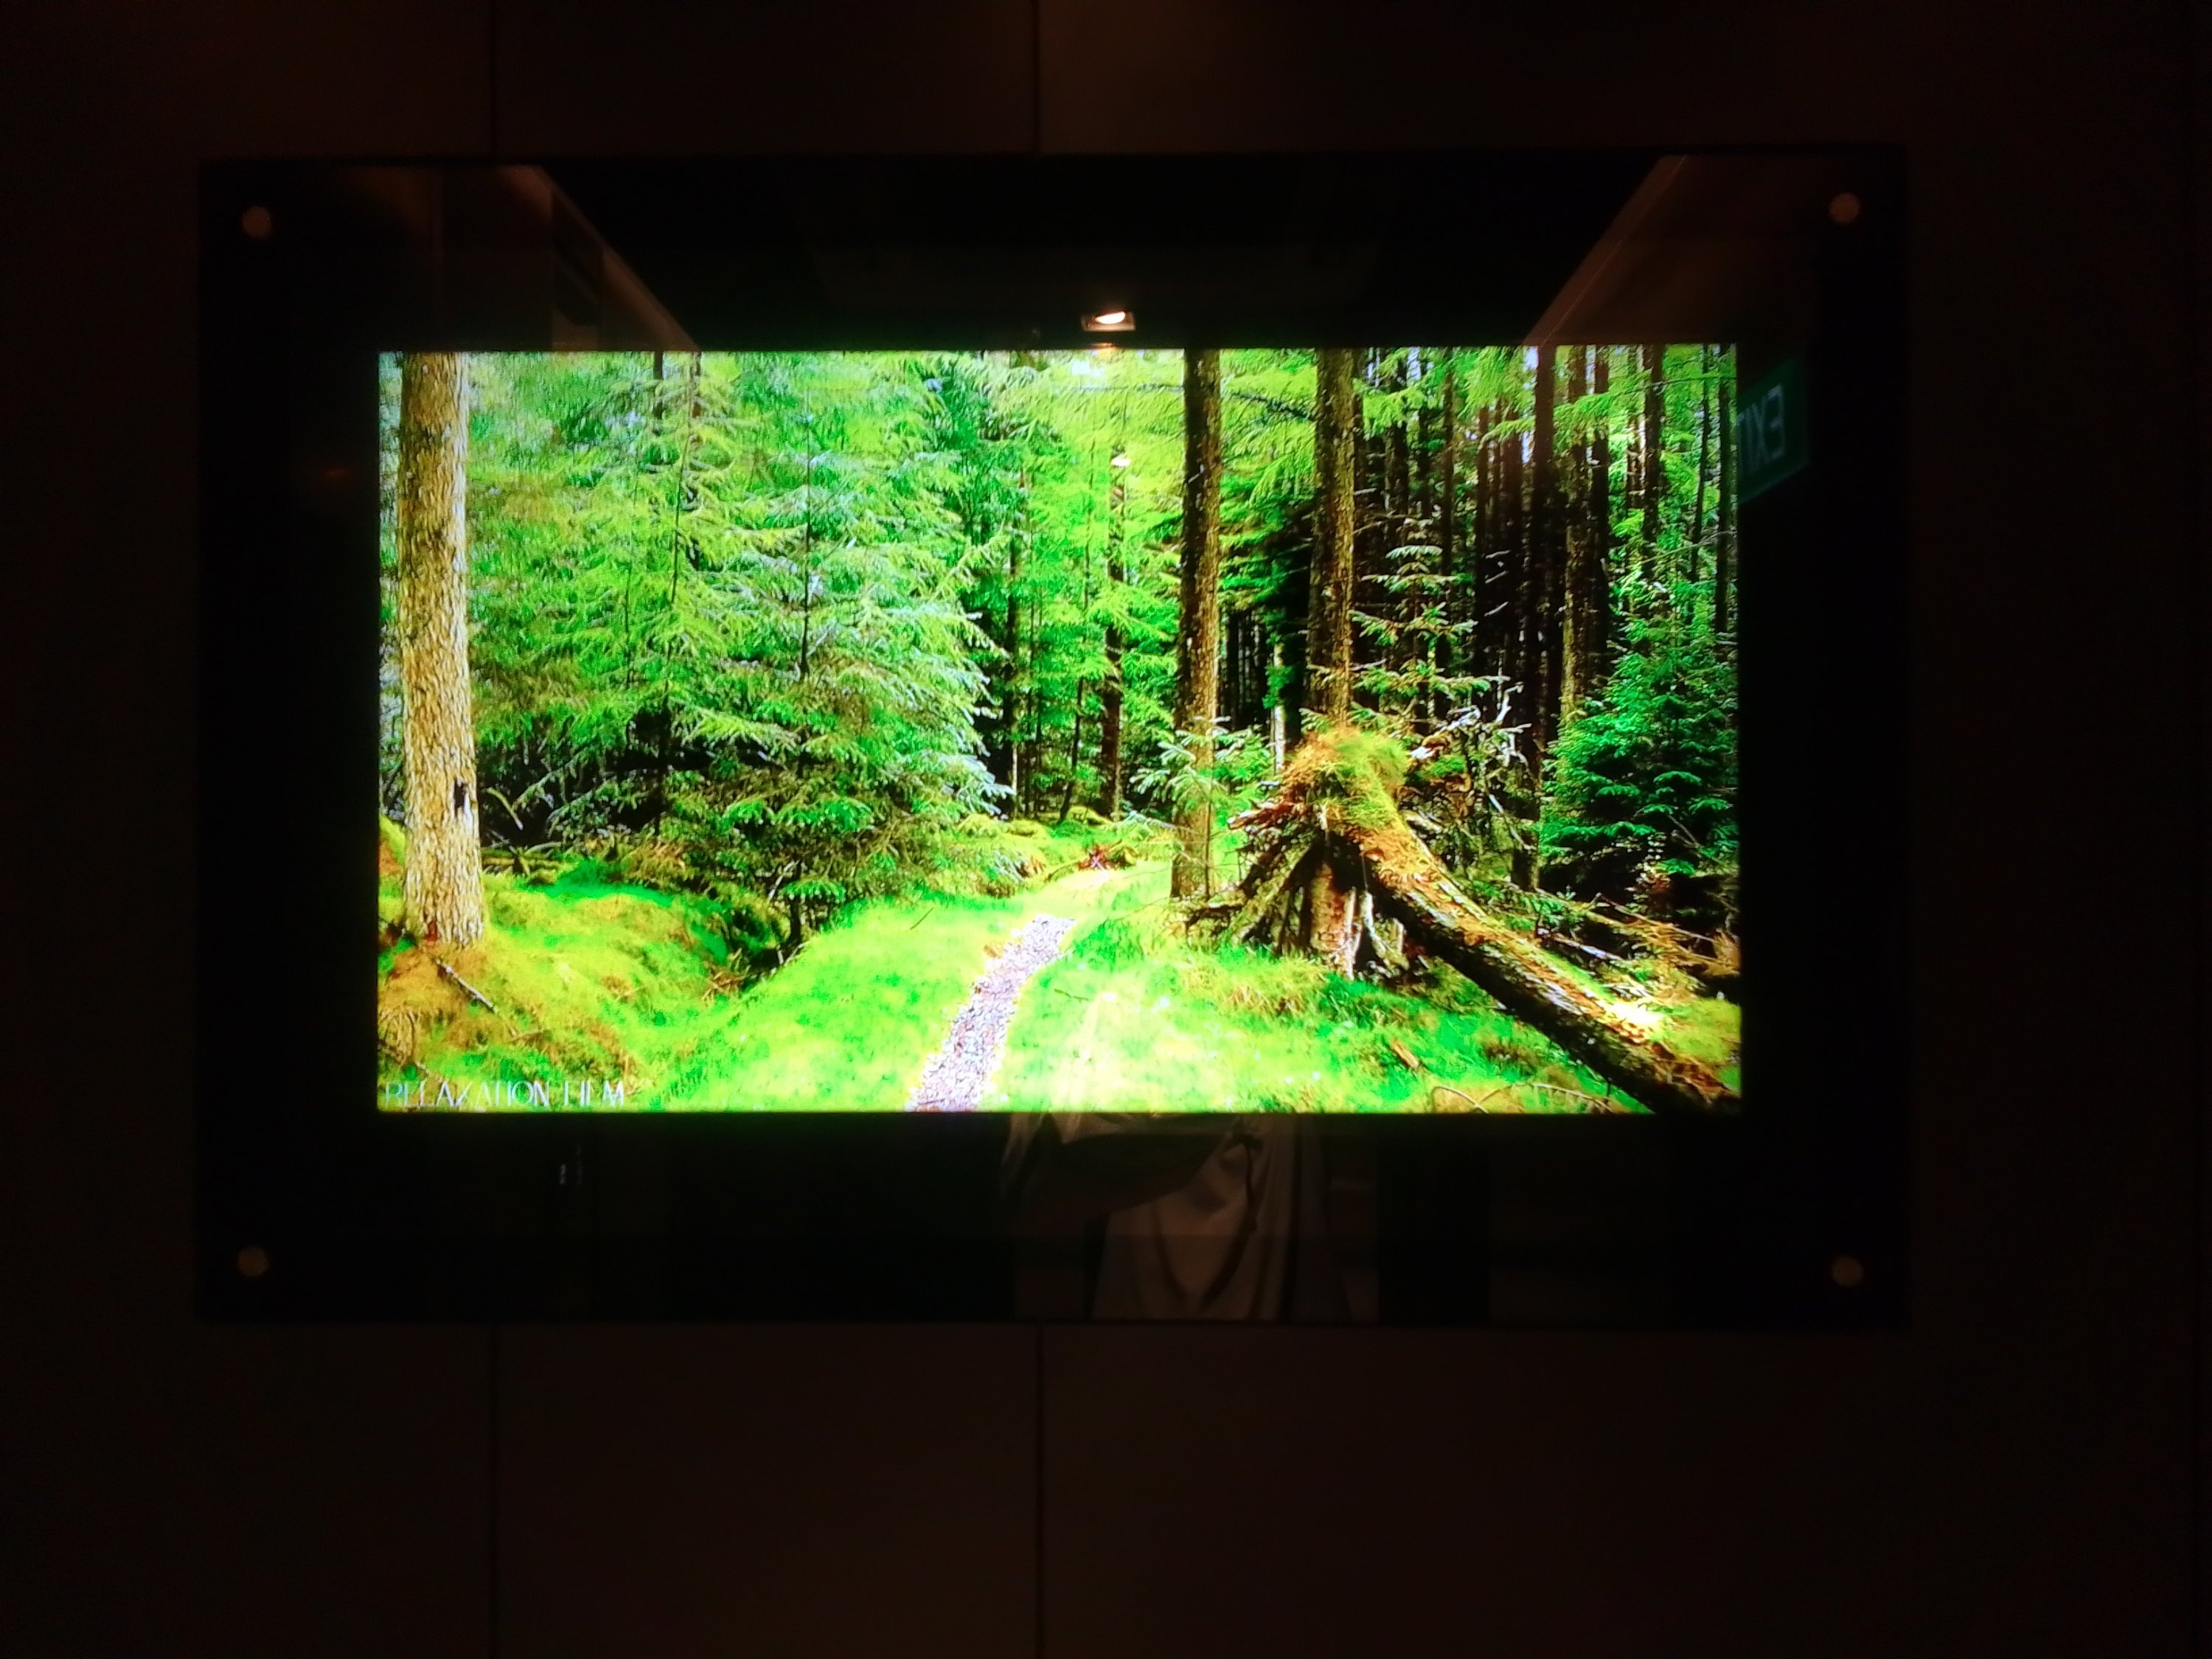 "Forest scenery" relaxation film: A reflection